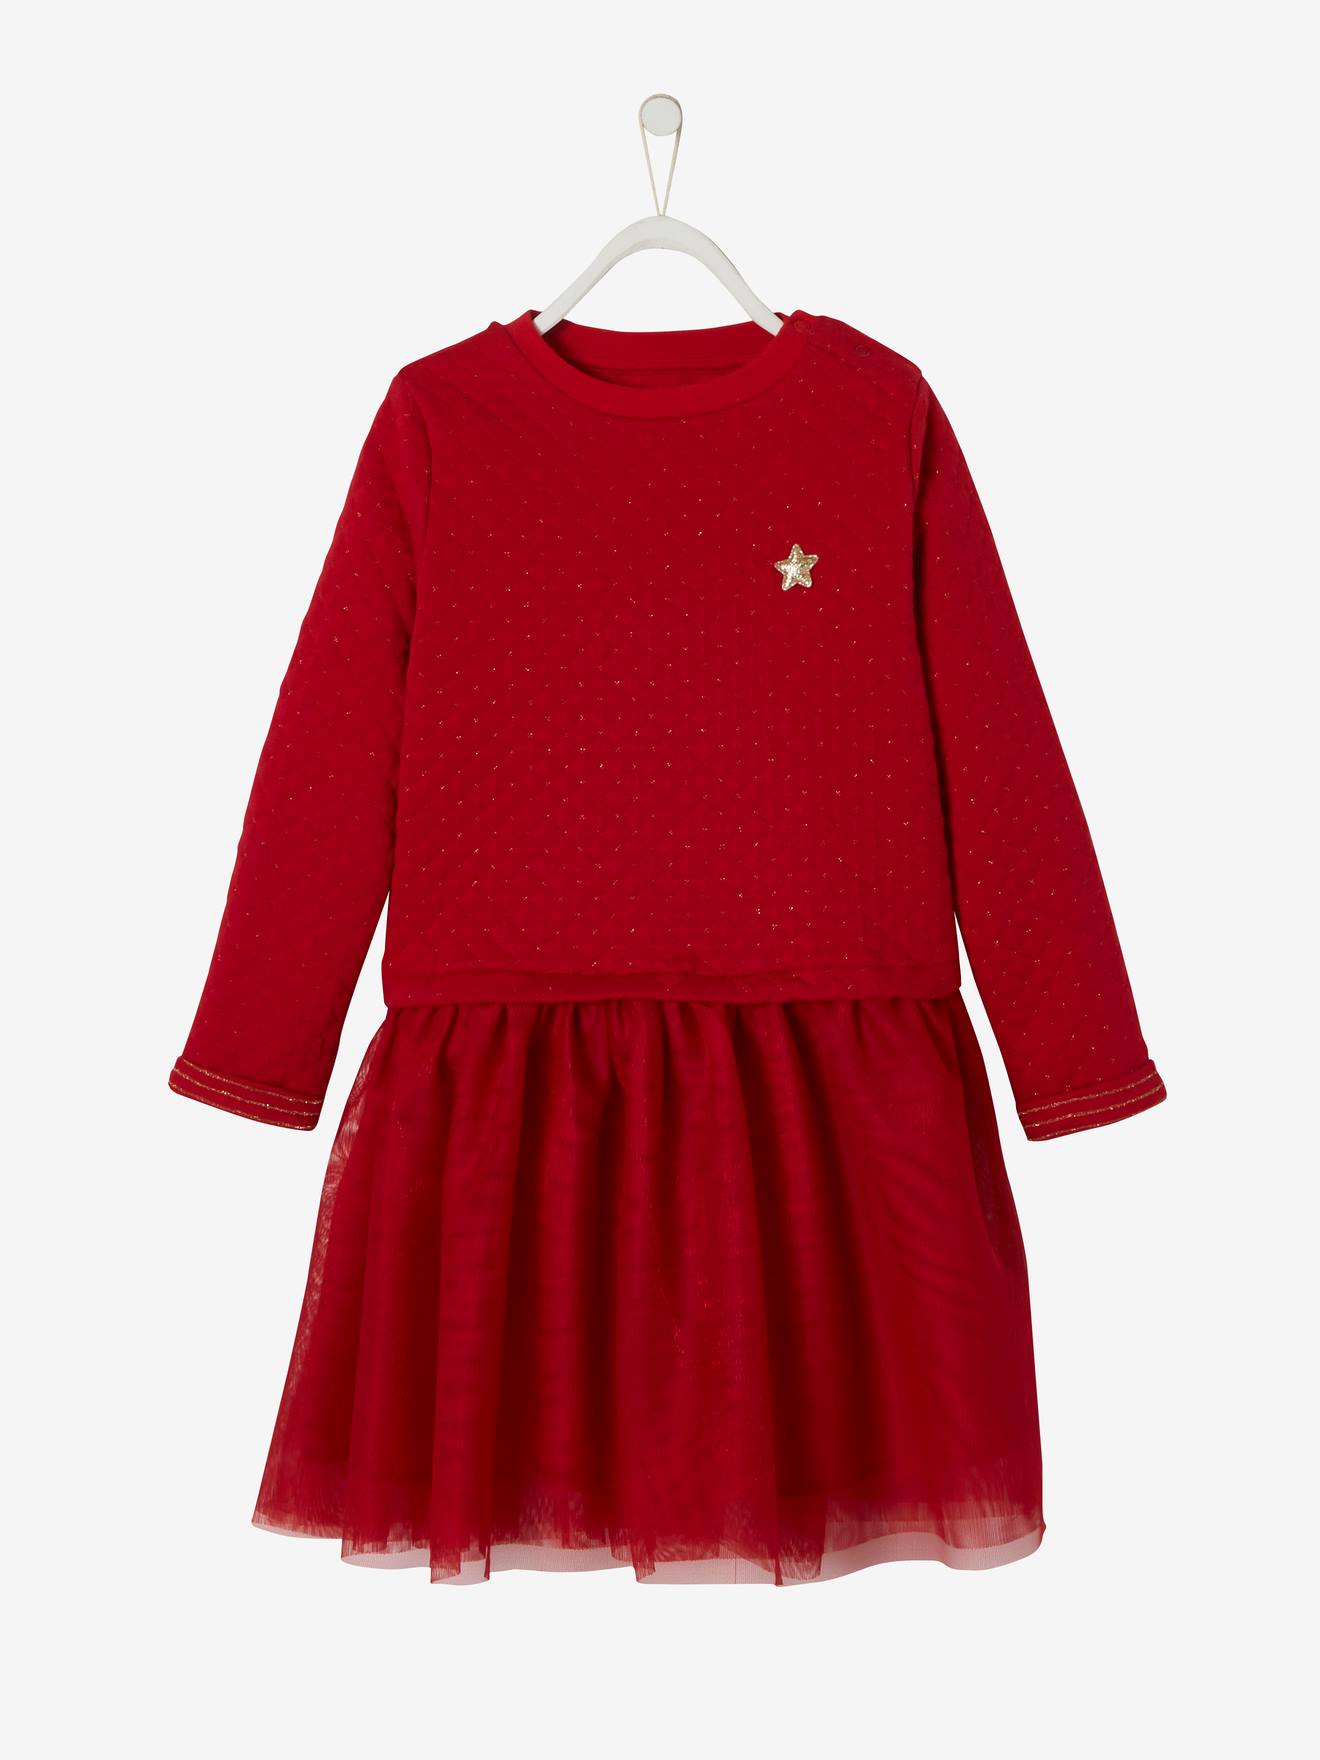 Dual Fabric Dress for Girls, Christmas Special dark red